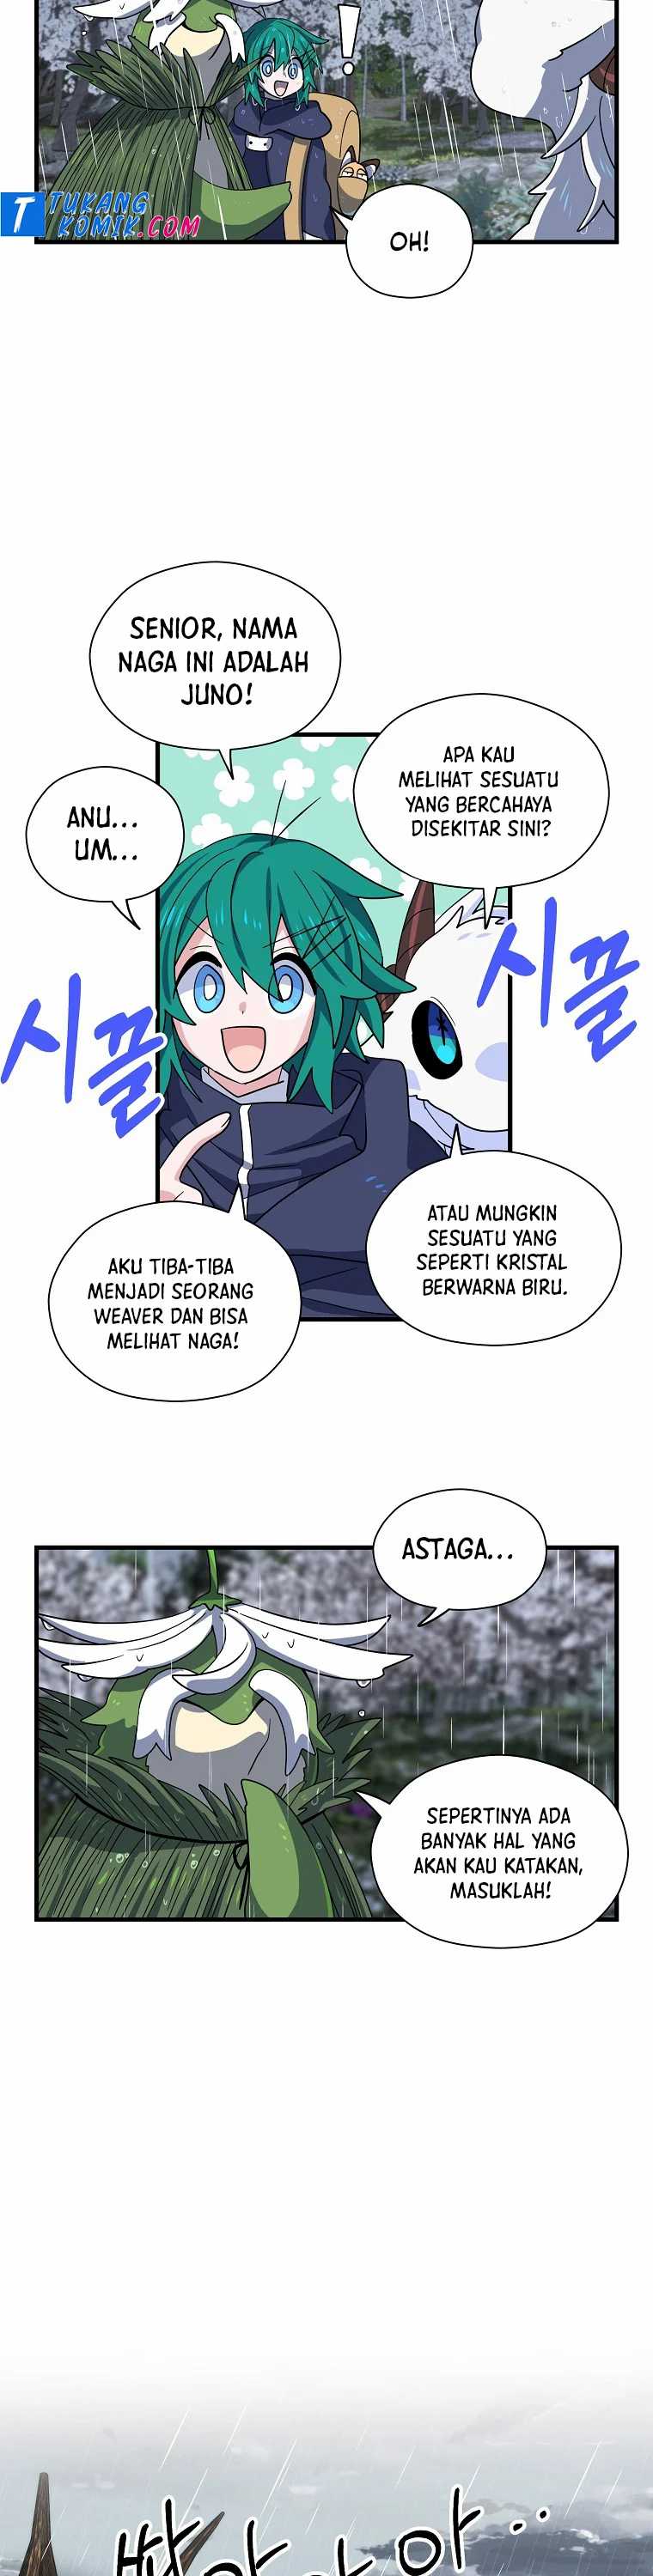 Asterisk The Dragon Walking On The Milky Way Chapter 06 - 213